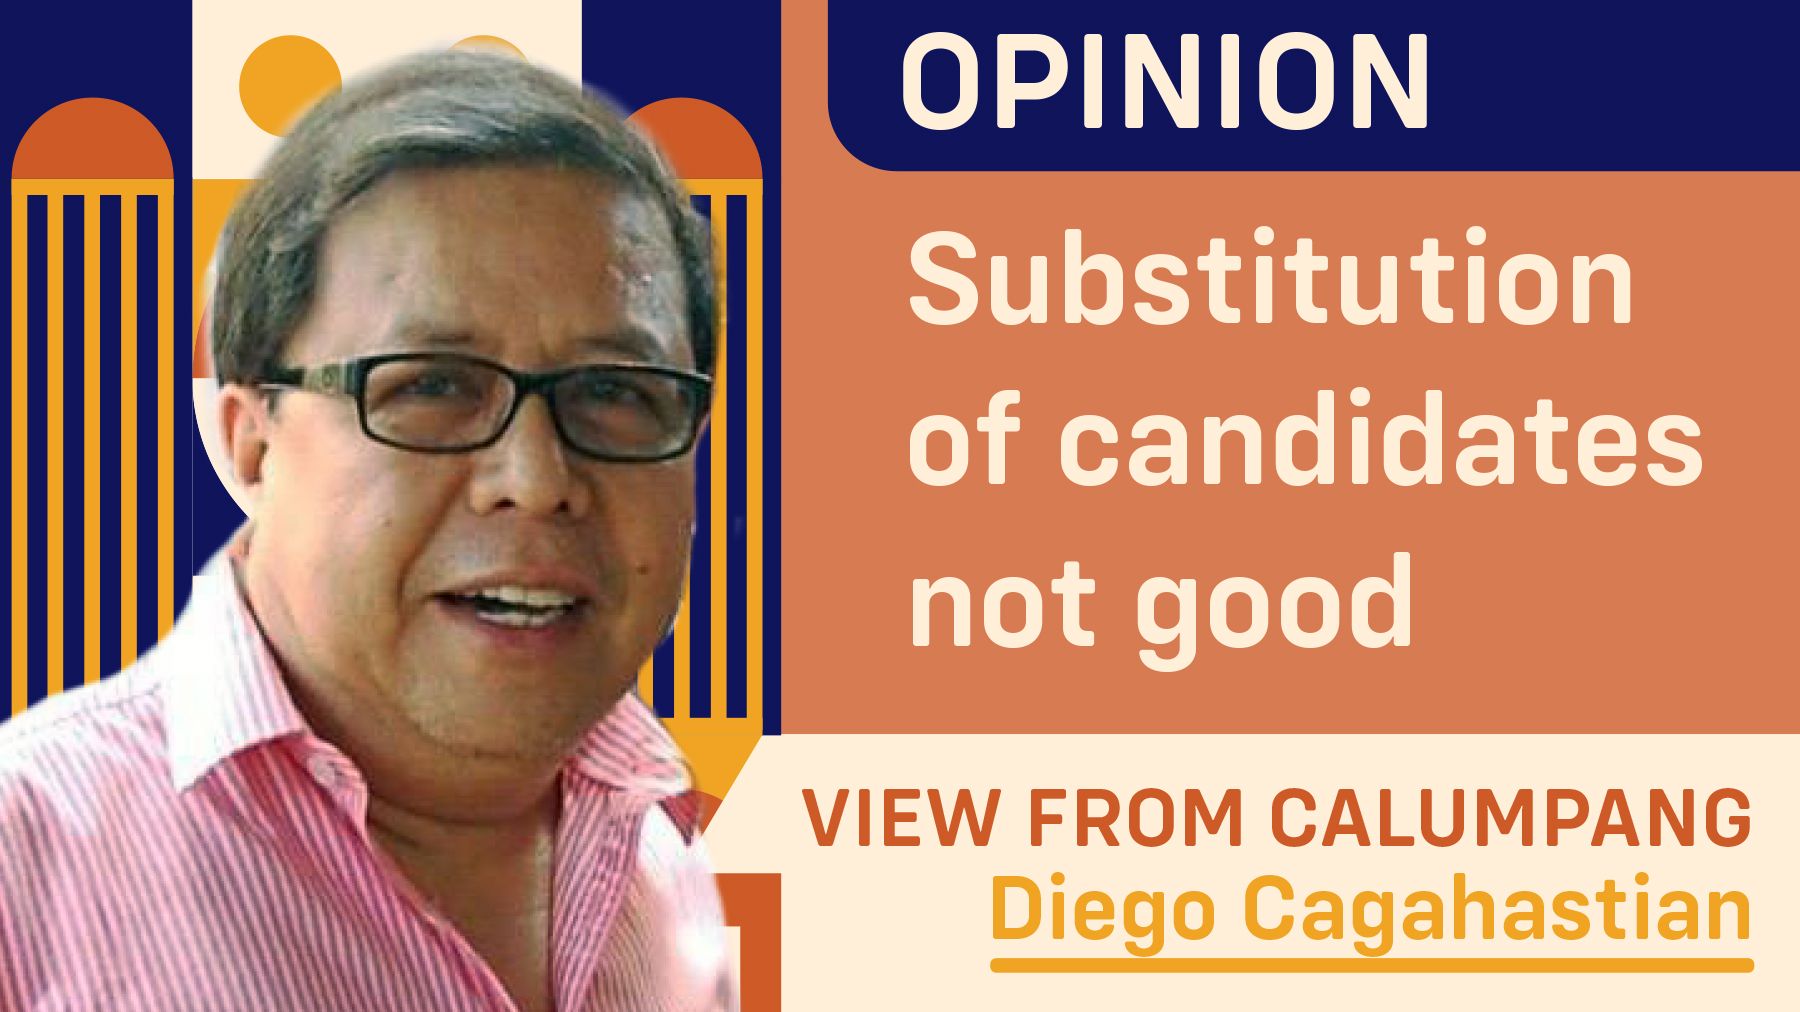 Substitution of candidates not good